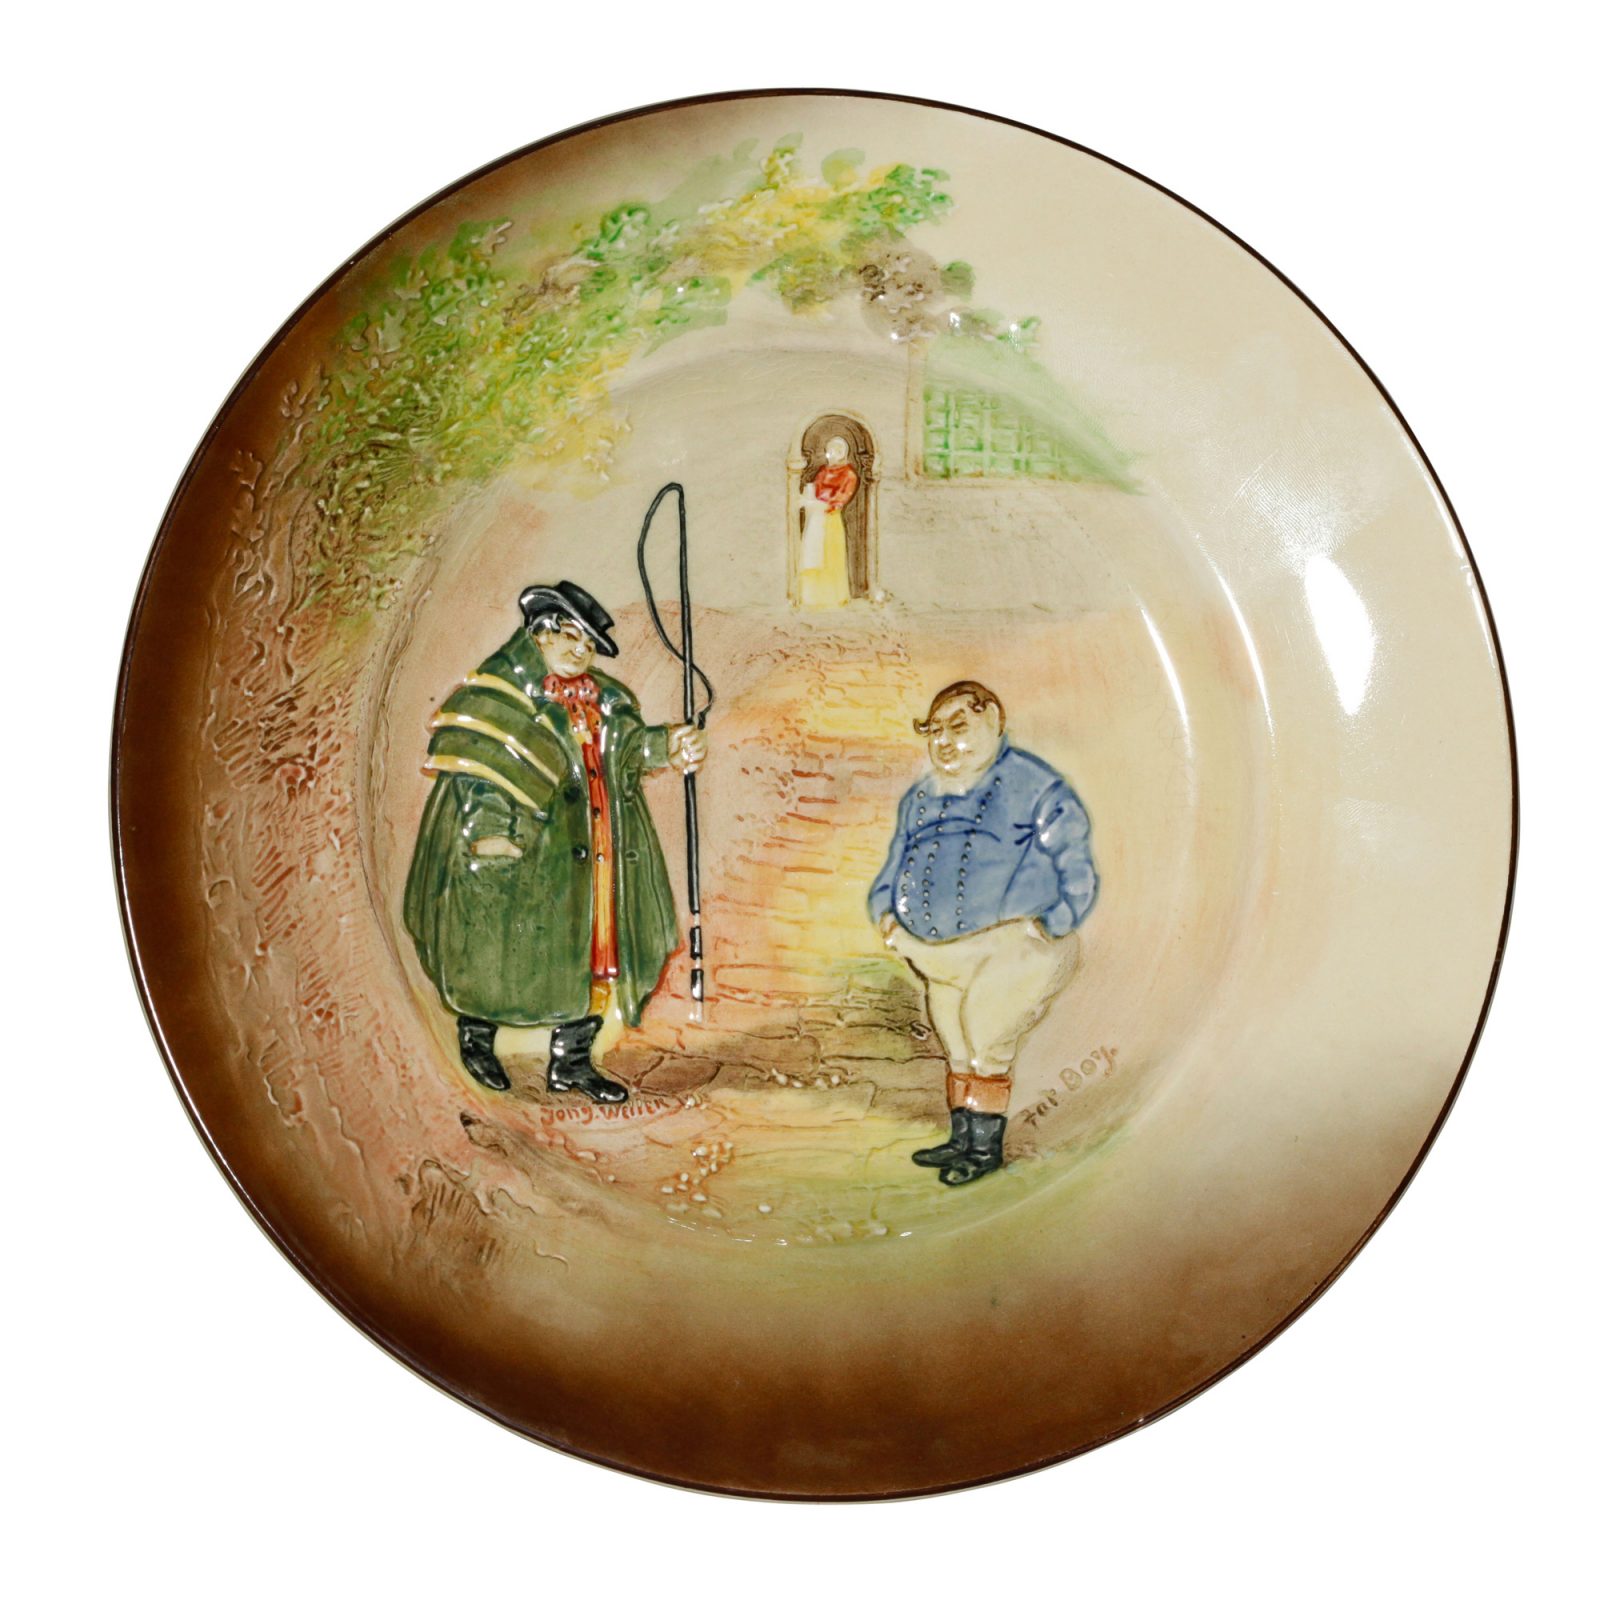 DickensTony Weller and Fat Boy - Royal Doulton Seriesware